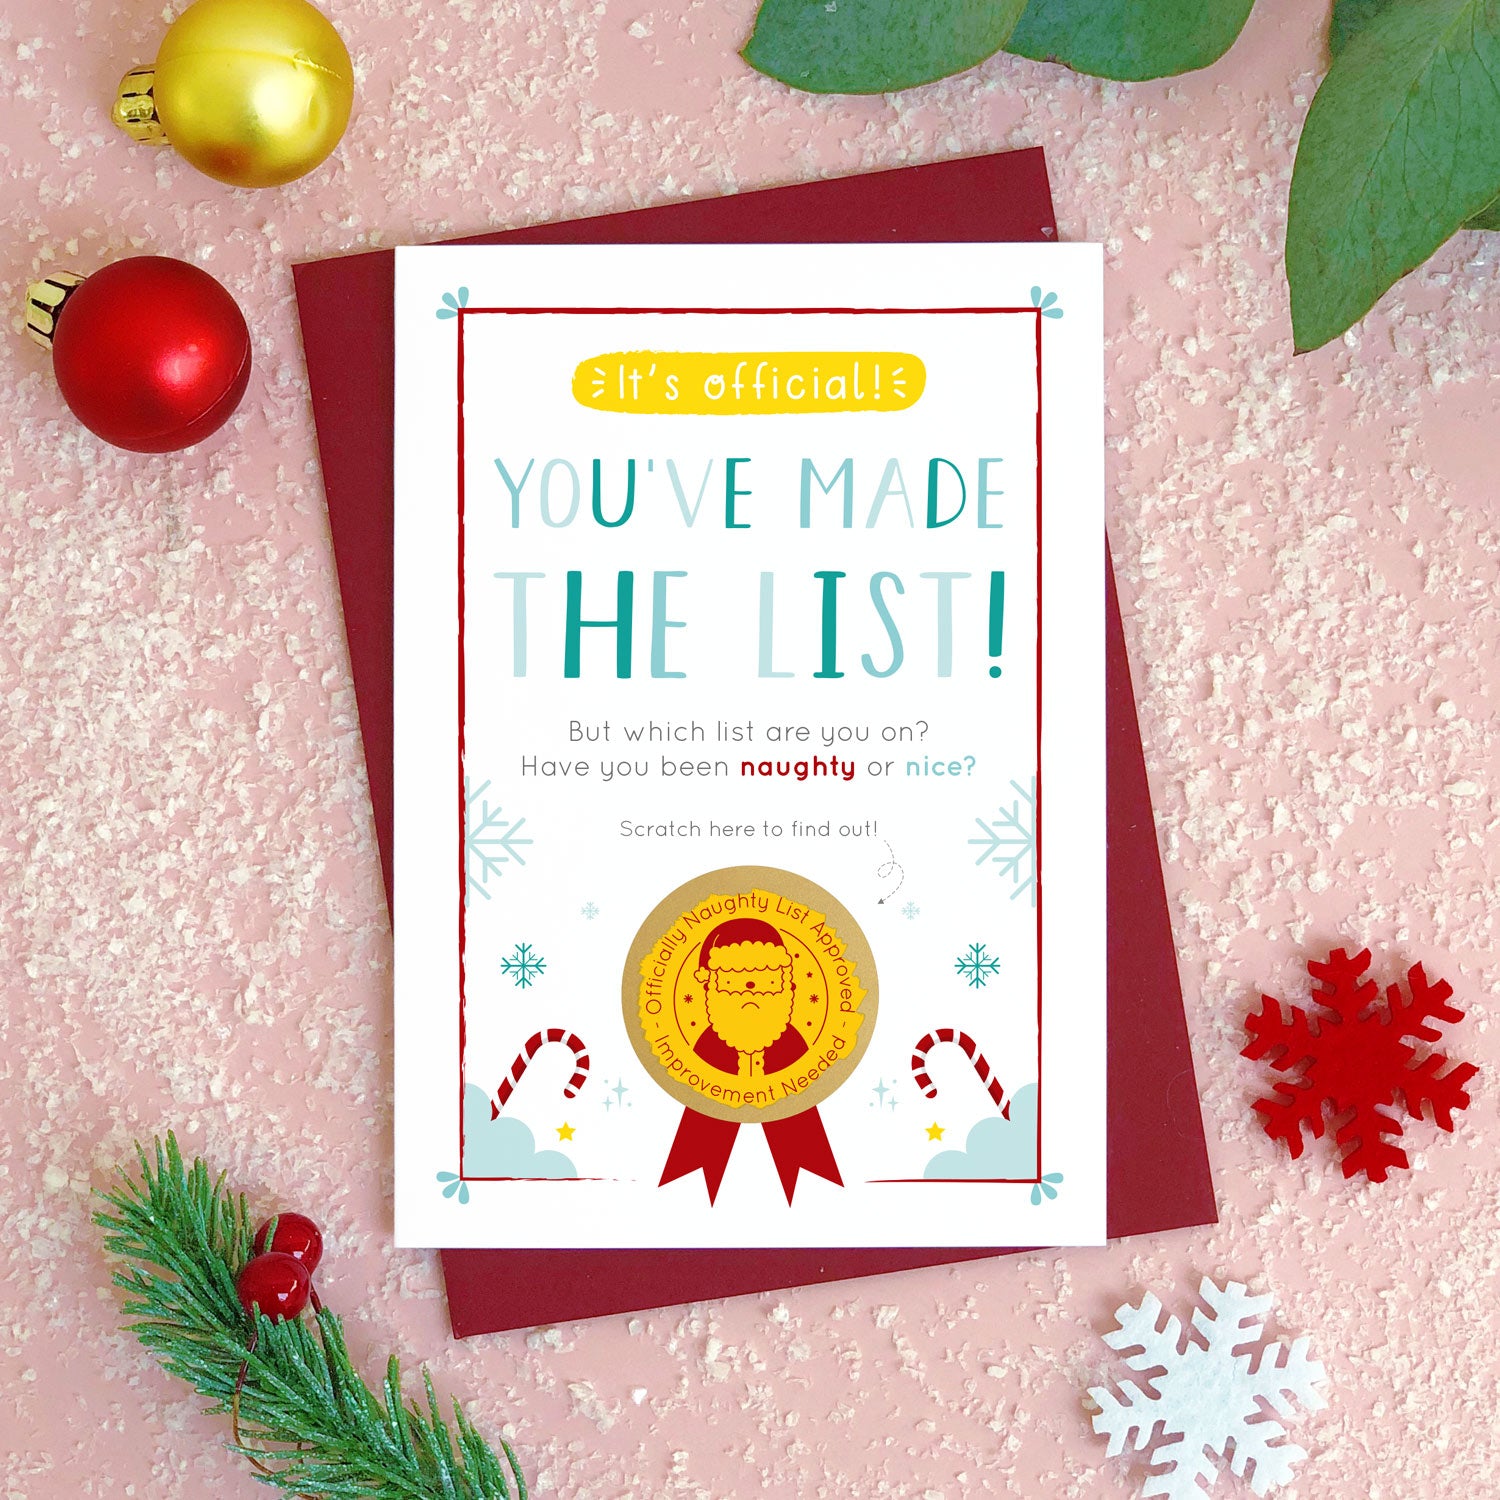 A naughty or nice christmas scratch card photographed flat lying on a red wine coloured envelope on a pink surface surrounded by fake snow, baubles and foliage. The gold panel has been completely scratched away to reveal the sad santa and naughty list approved stamp!